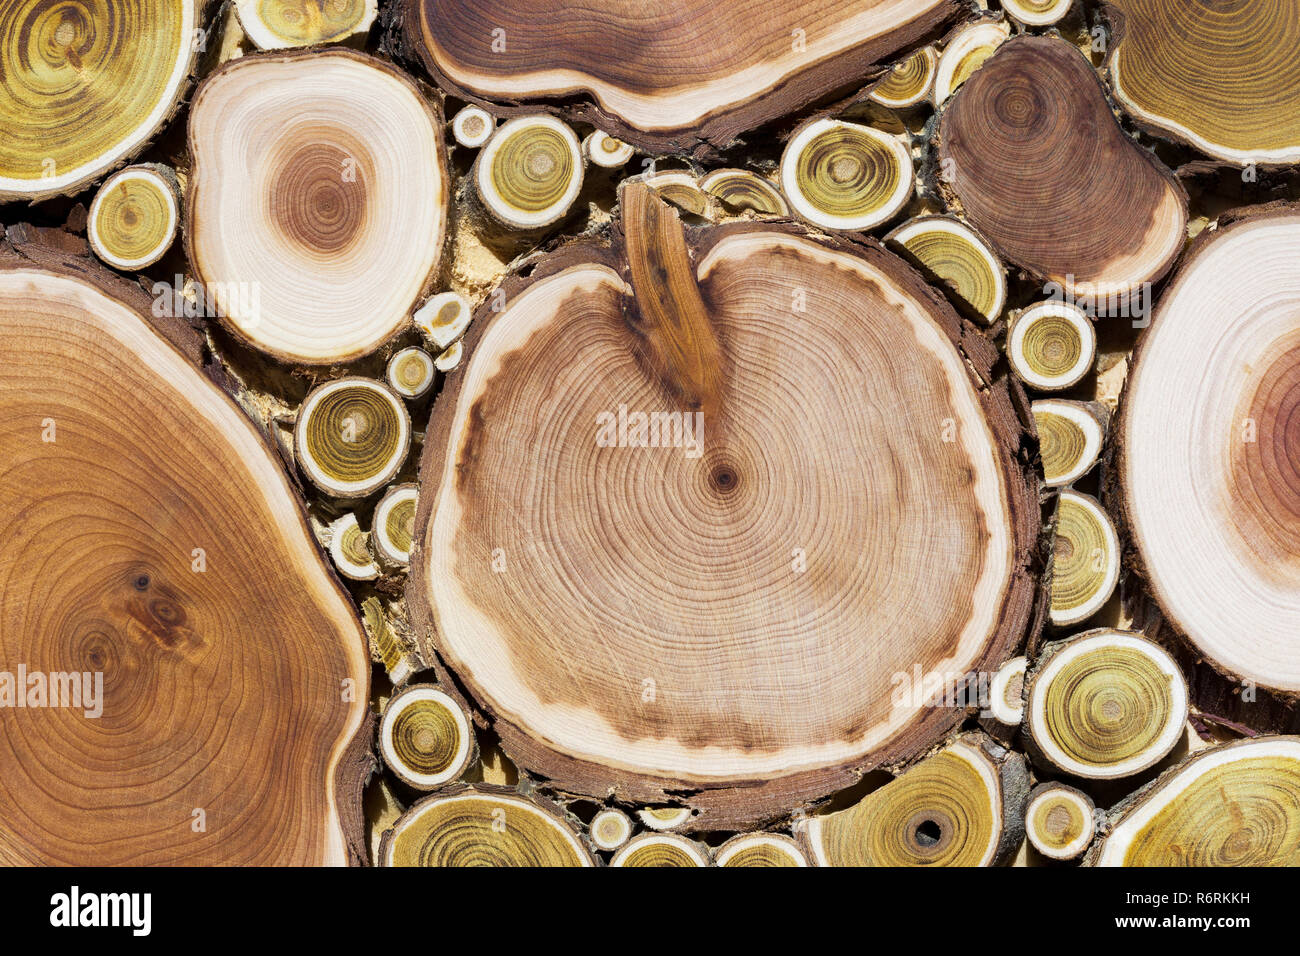 Sections of the trunks of various tree species. Abstract background. Stock Photo